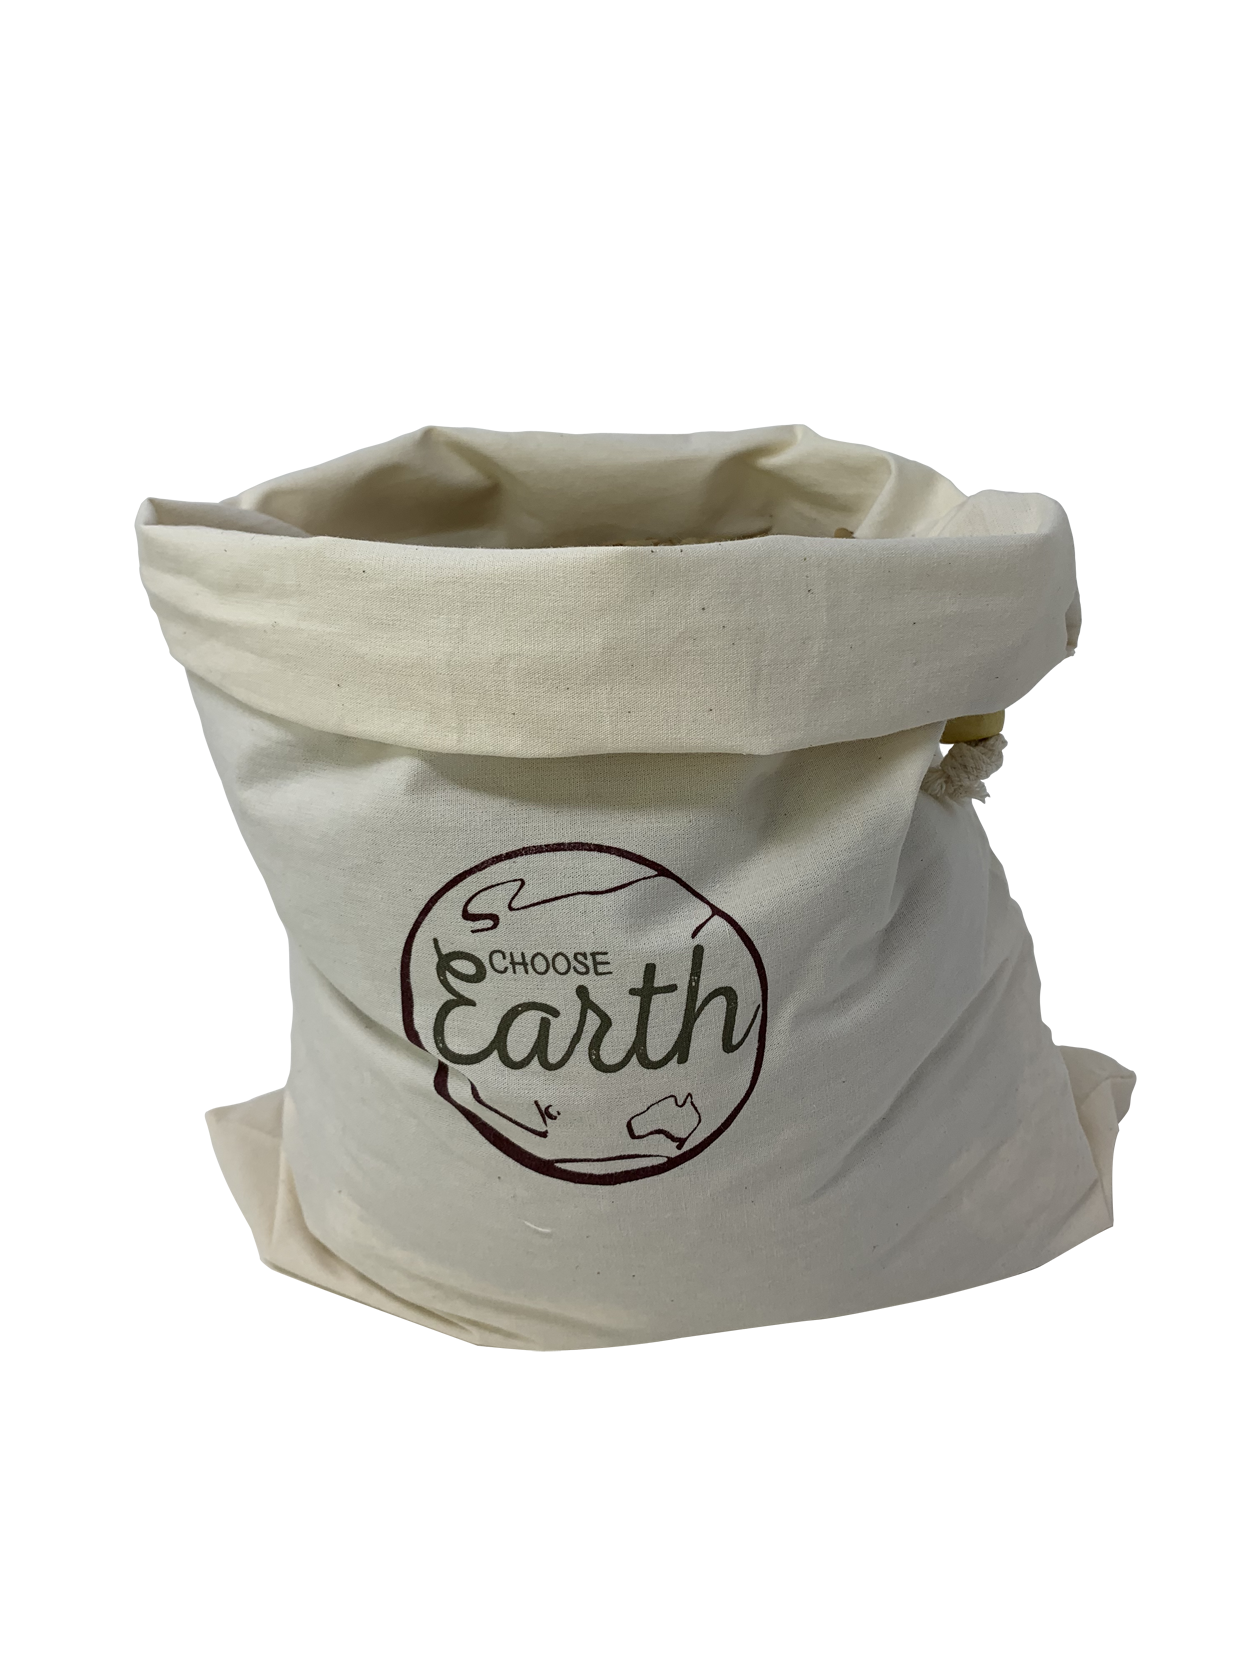 Buy Australian Organic Cotton Produce Bag, Bulk Food Storage and Snack Bags by Little Mashies Australia Reusable Food Pouches